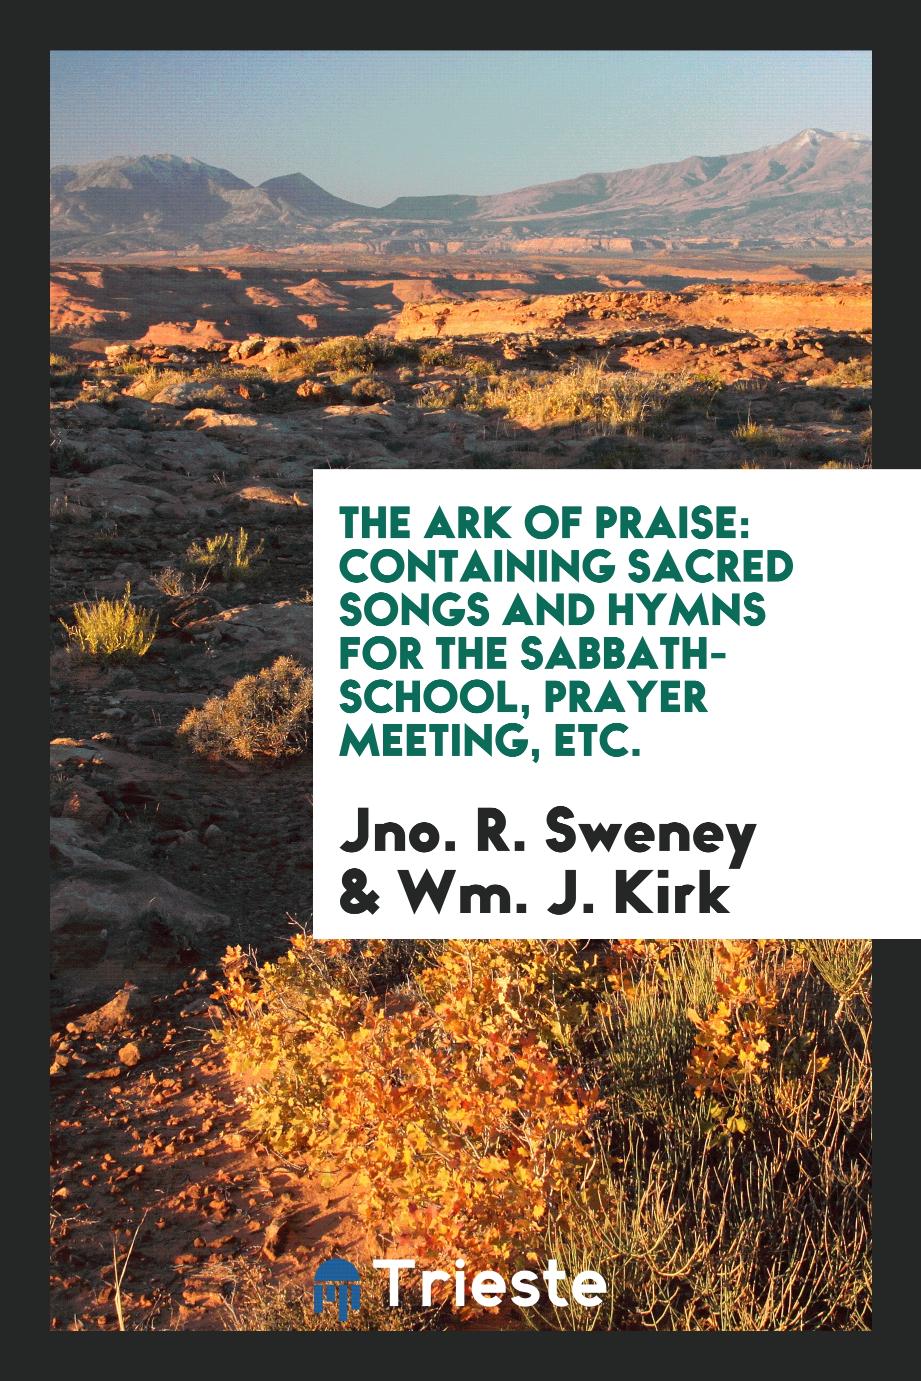 The Ark of Praise: Containing Sacred Songs and Hymns for the Sabbath-School, Prayer Meeting, Etc.